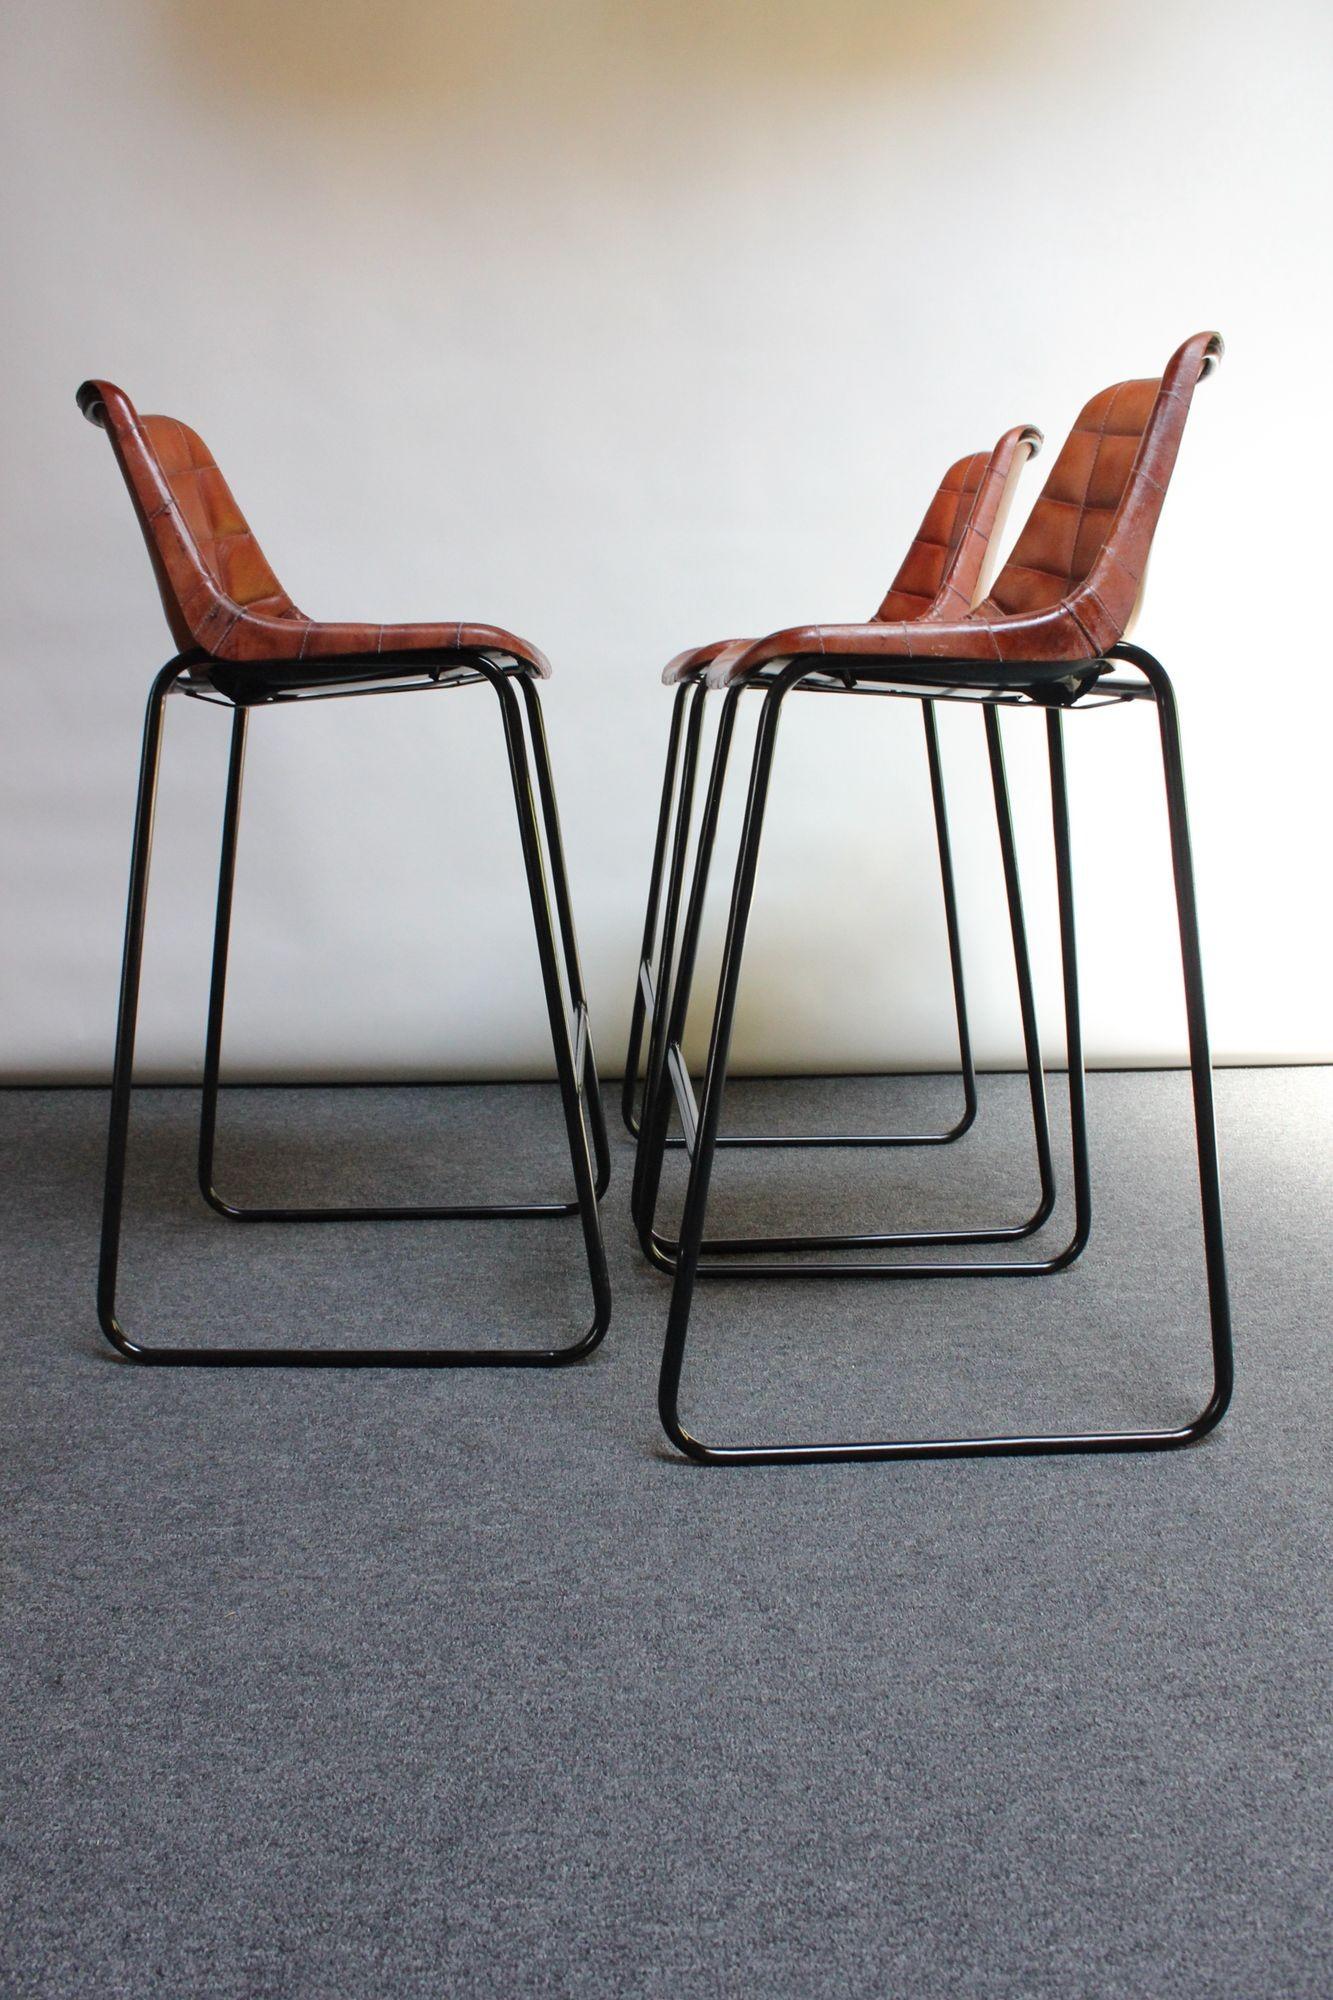 Set of Three Italian Vintage Leatherette and Wrought Iron Barstools In Good Condition For Sale In Brooklyn, NY